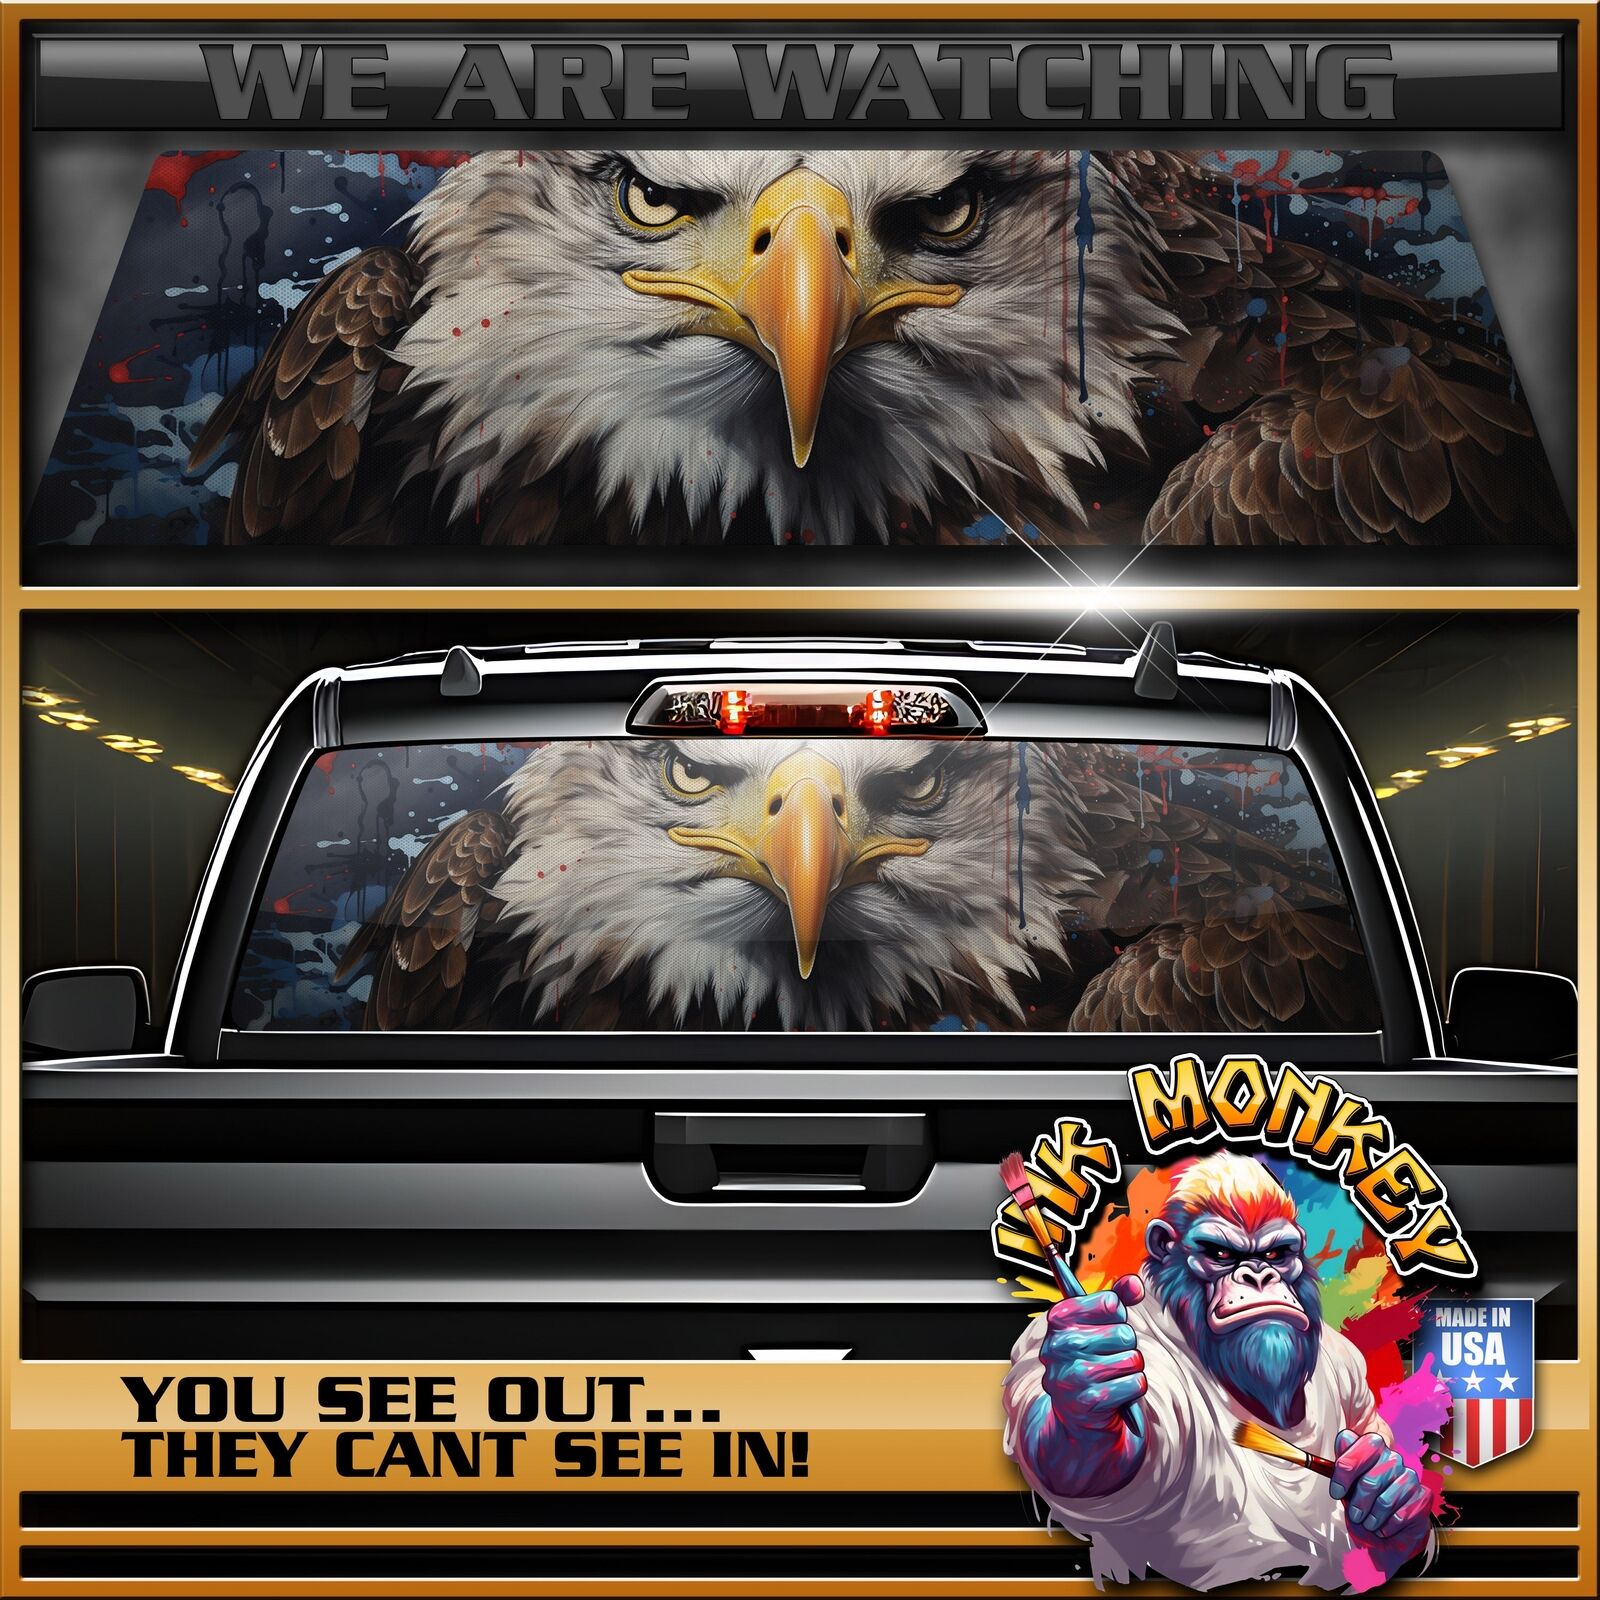 American Bald Eagle - Truck Back Window Graphics - We Are Watching